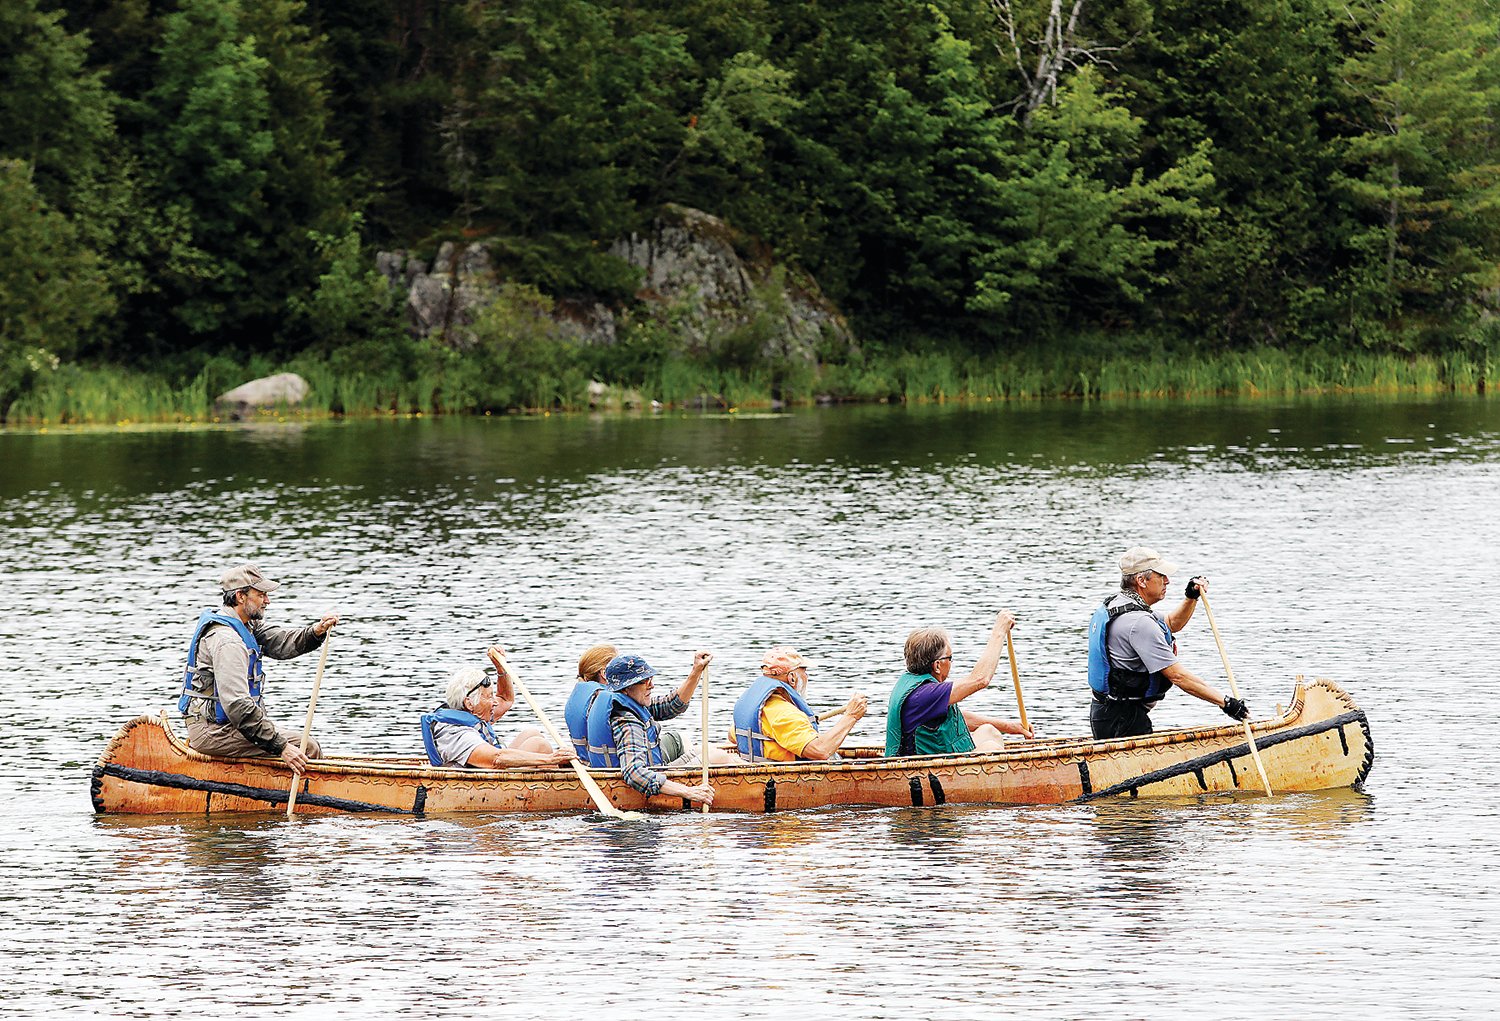 Eric Simula, in the stern, and other paddlers hit the water at Semer’s Park Sunday afternoon for the maiden voyage of the Burntside, a 20-foot Ojibwe-style birch bark canoe made at the Ely Folk School.